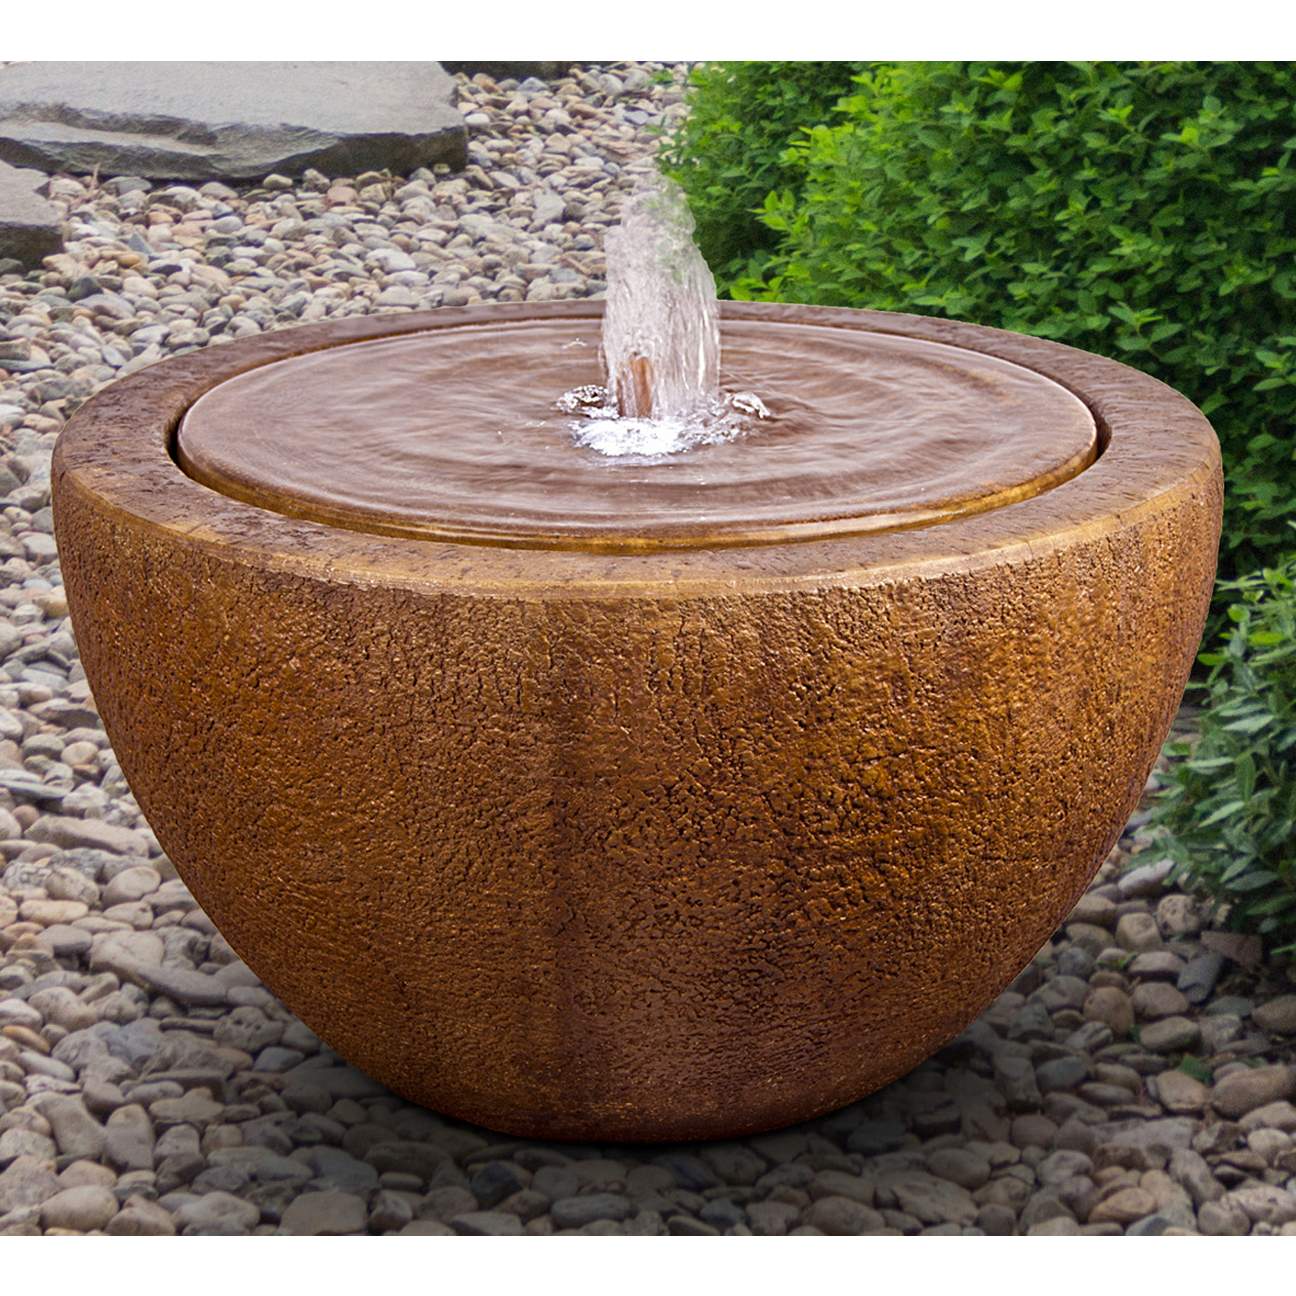 tranquility-14-modern-outdoor-bubbler-fountain-with-light-65f50